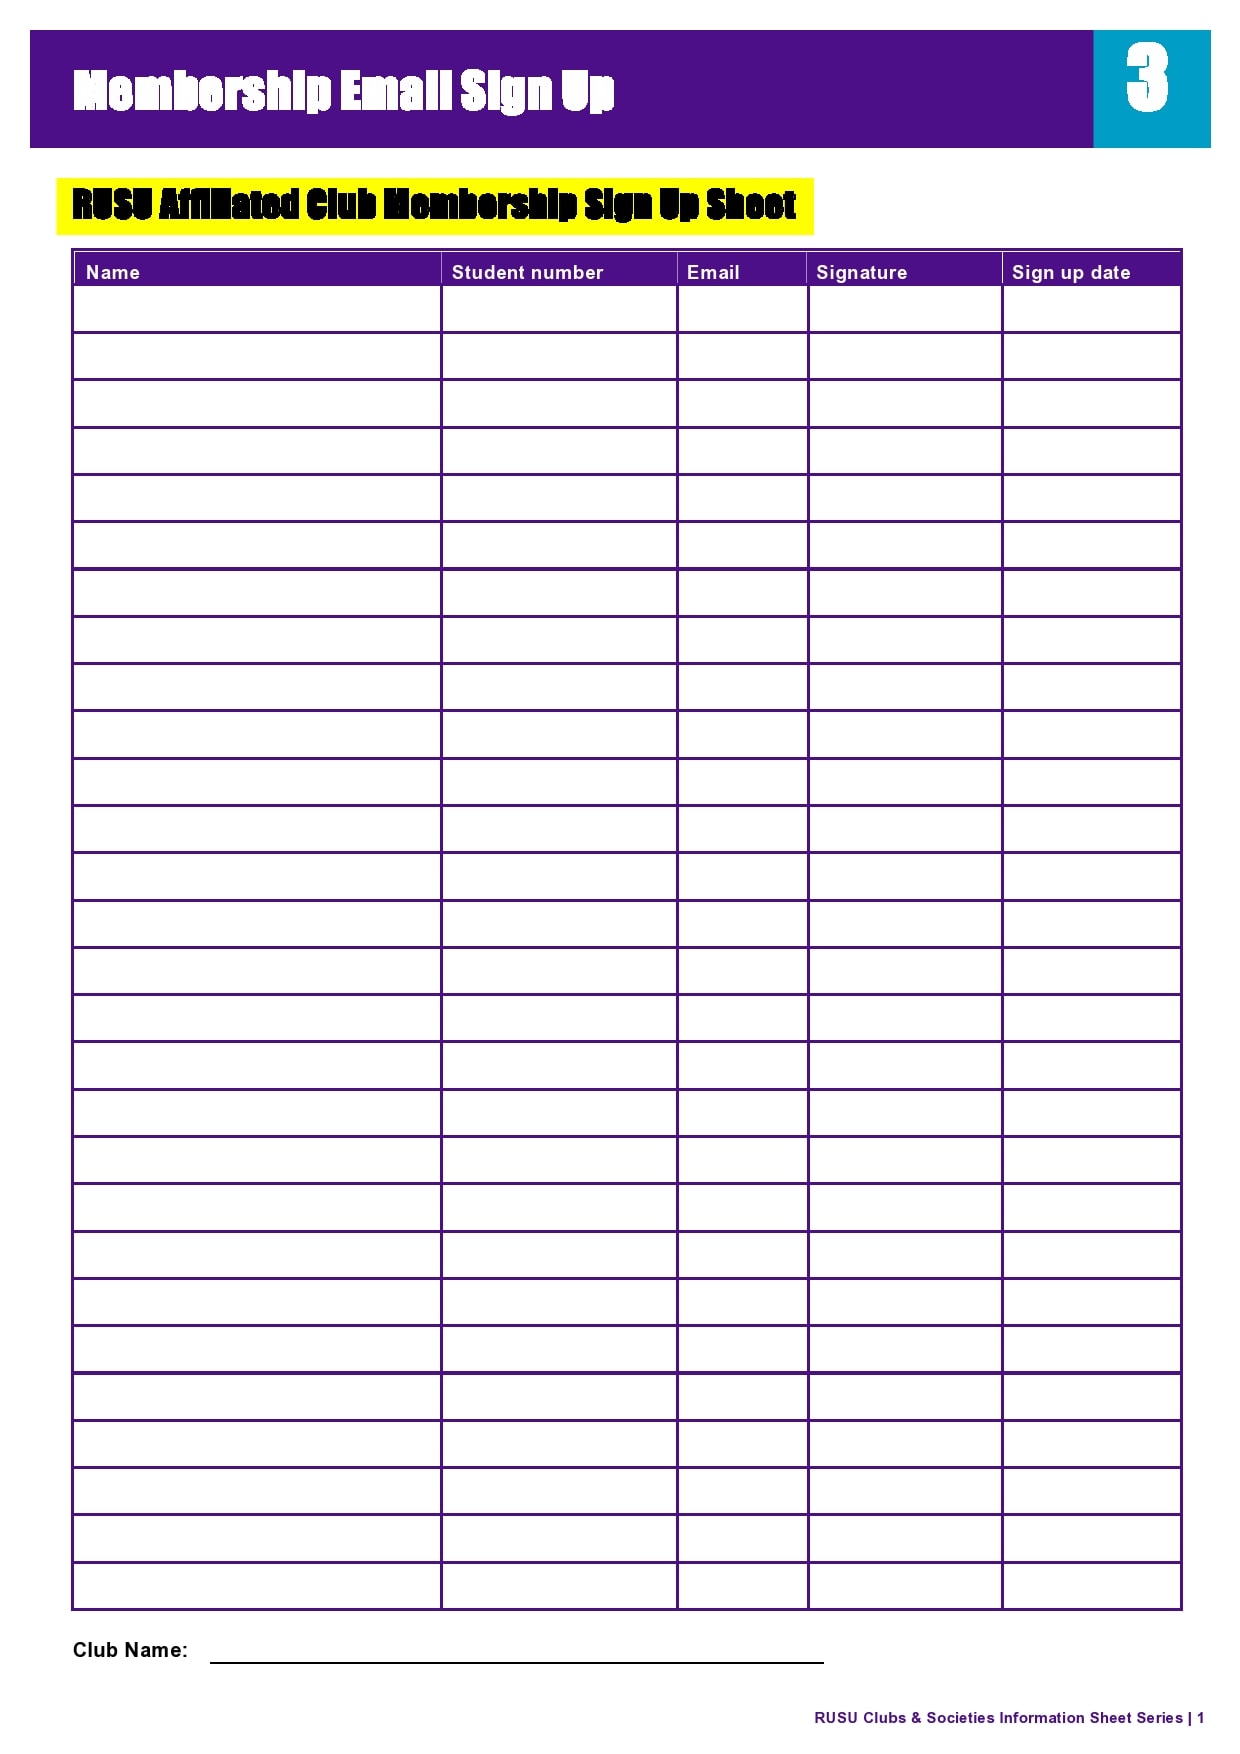 30 Best Email Sign Up Sheet Templates (Word/Excel)